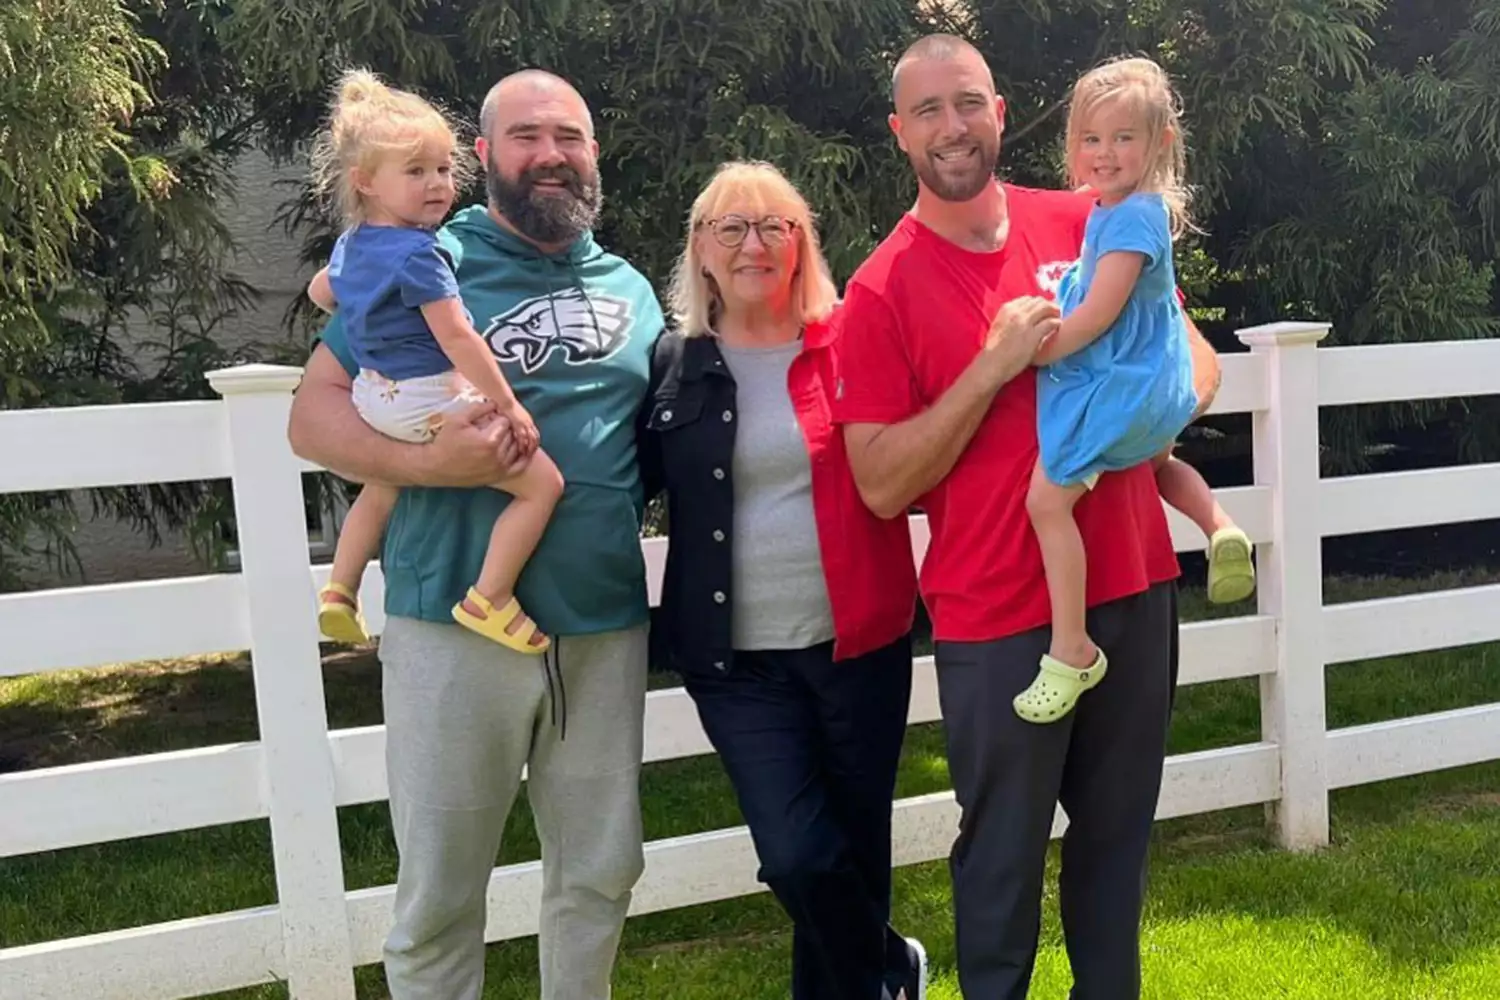 Jason Kelce Poses with Daughters Wyatt and Elliotte, Brother Travis Kelce and Mom Donna Kelce in Family Photo https://www.instagram.com/p/Csq7LA2s2HT/